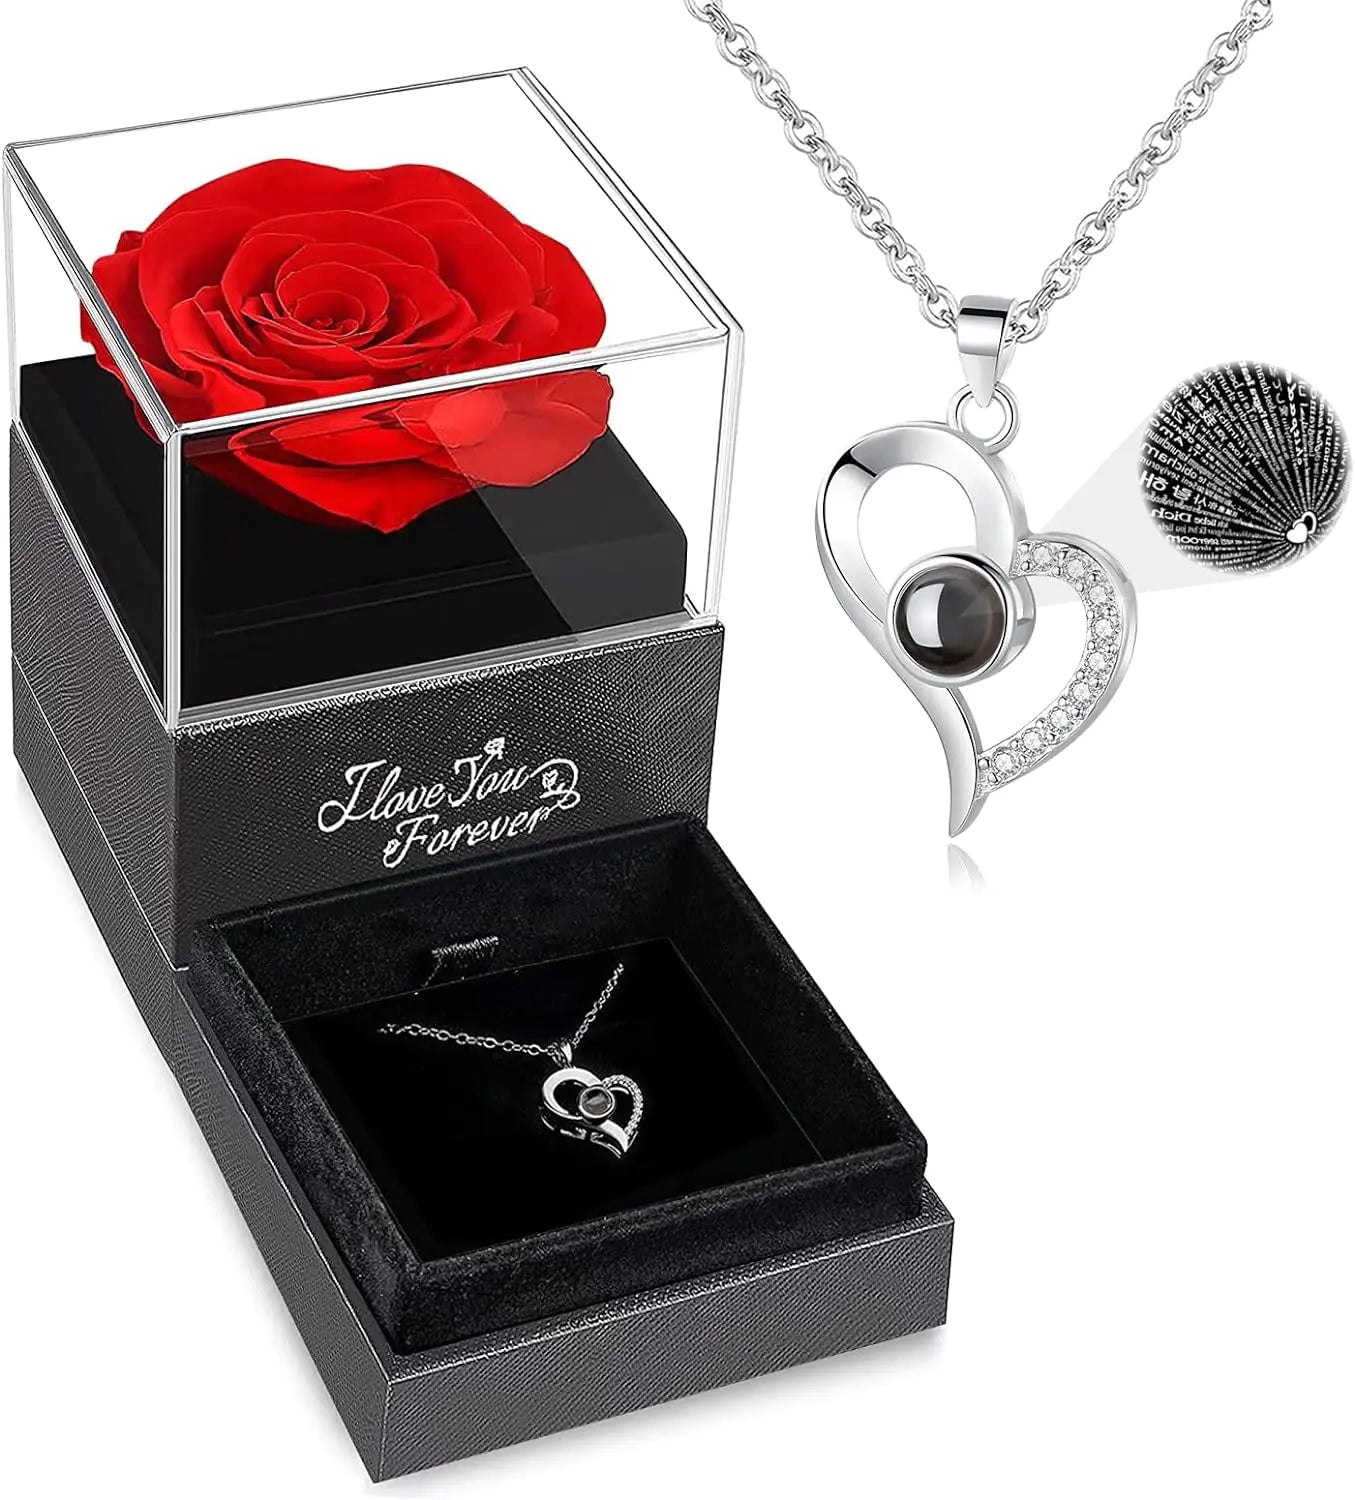 WILDLOVE Preserved Real Rose with I Love You Necklace, Christmas Gifts for Women, Mom, Grandma, Wife and Girlfriend, Birthday Anniversary Valentine's Day Mother's Day Gift Ideas for Her